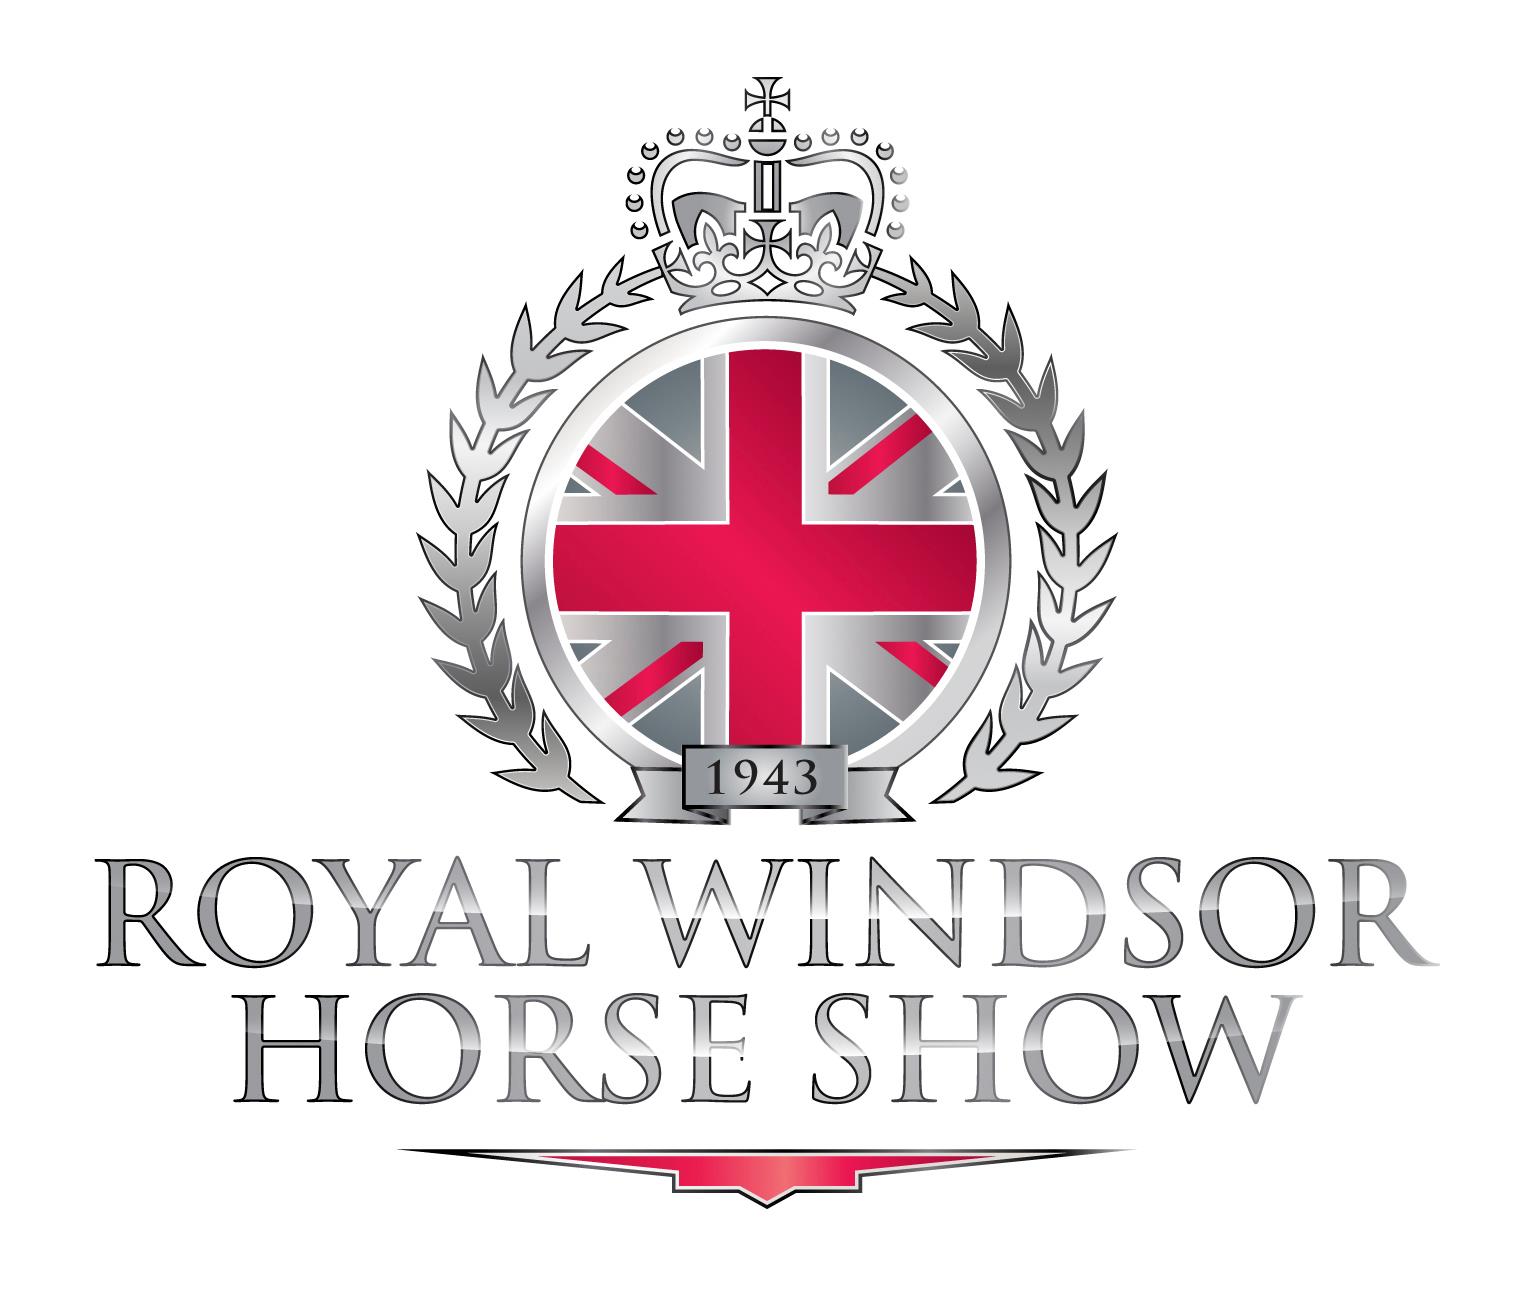 Royal Windsor Horse show is starting online edition